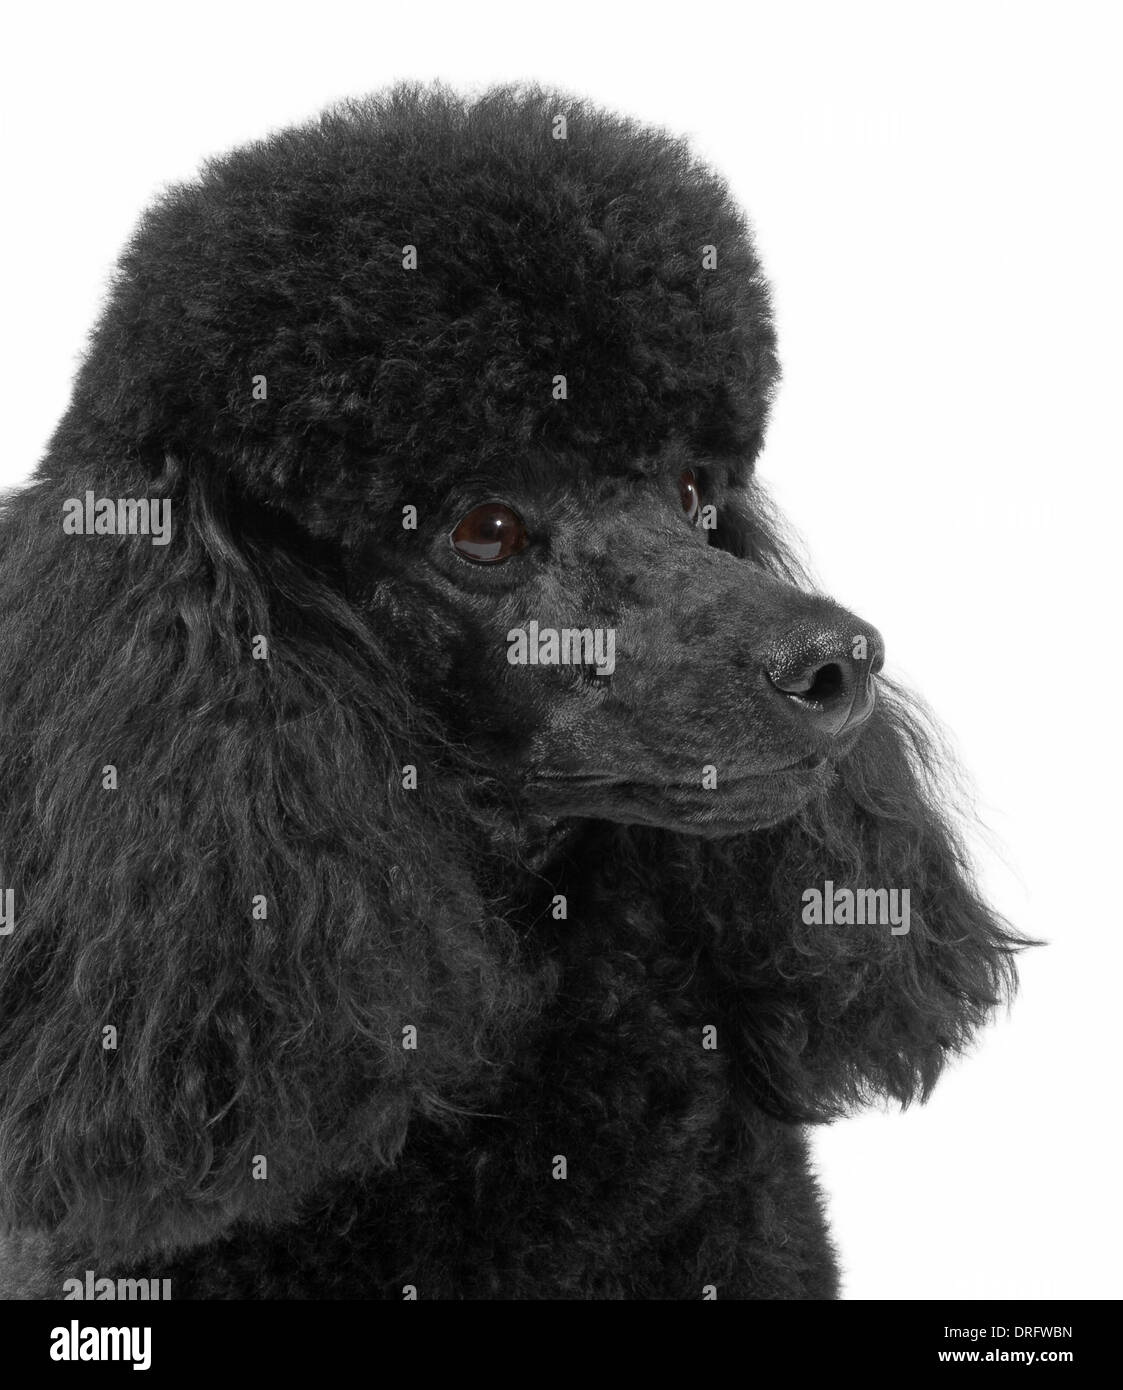 Miniature Poodle aged 1 year Stock Photo